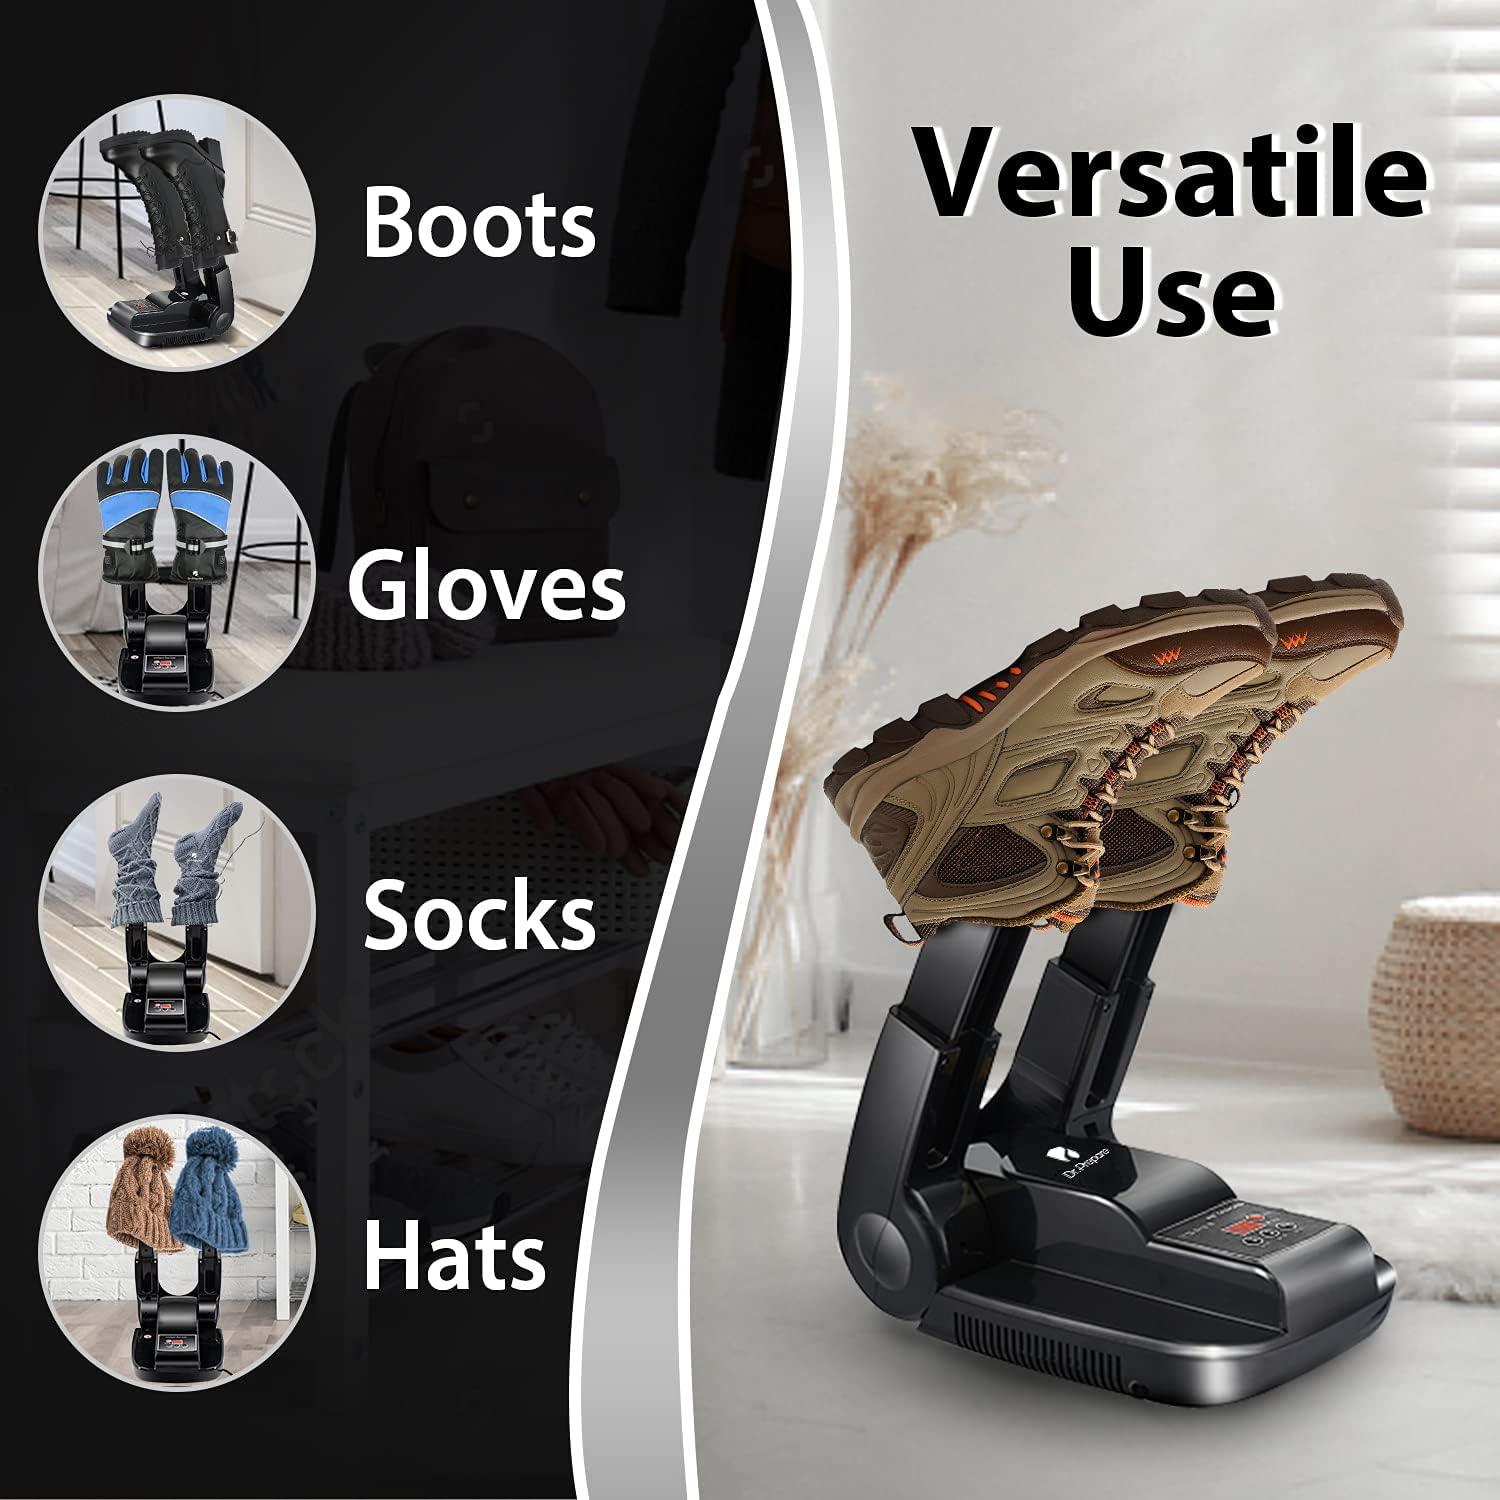 Dr. Prepare Boot Dryer Shoe Dryer, Glove Dryer & Boot Warmer with Heat  Blower, Portable Adjustable Rack and Timer, Folding Design & Quick Drying  for Shoes, Gloves, Hats, Socks, Ski Boots